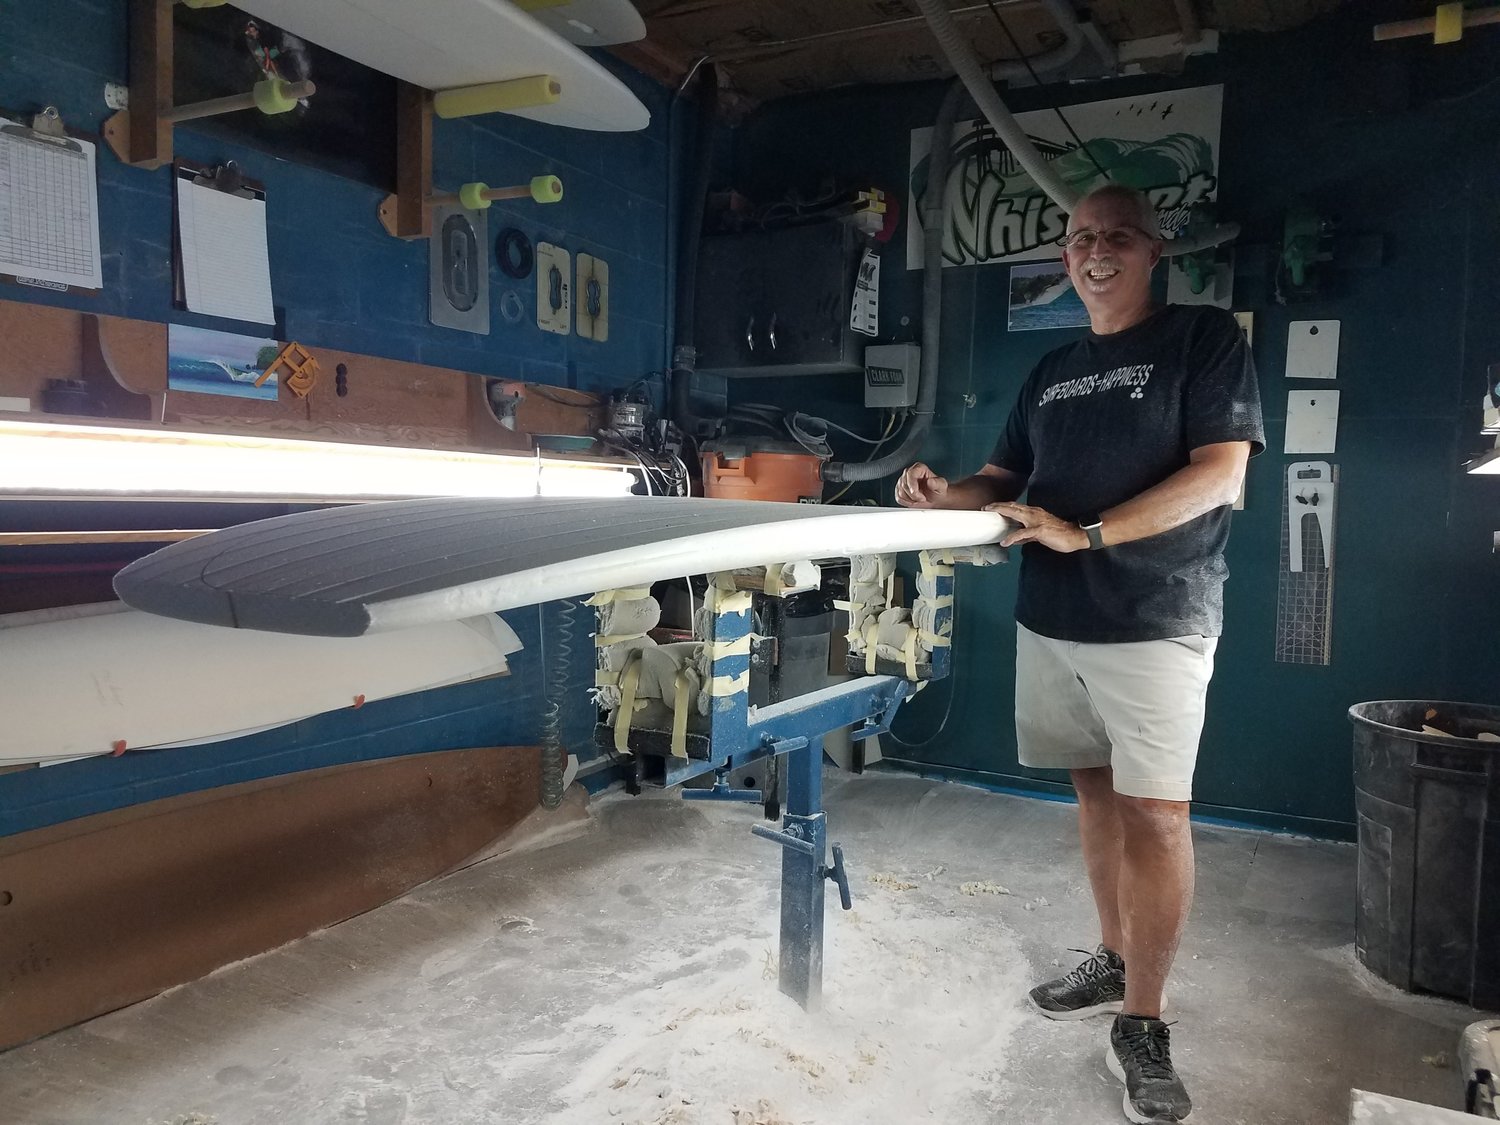 Mike Whisnant started shaping surfboards in 1989, which is also when he opened his shop in Atlantic Beach.